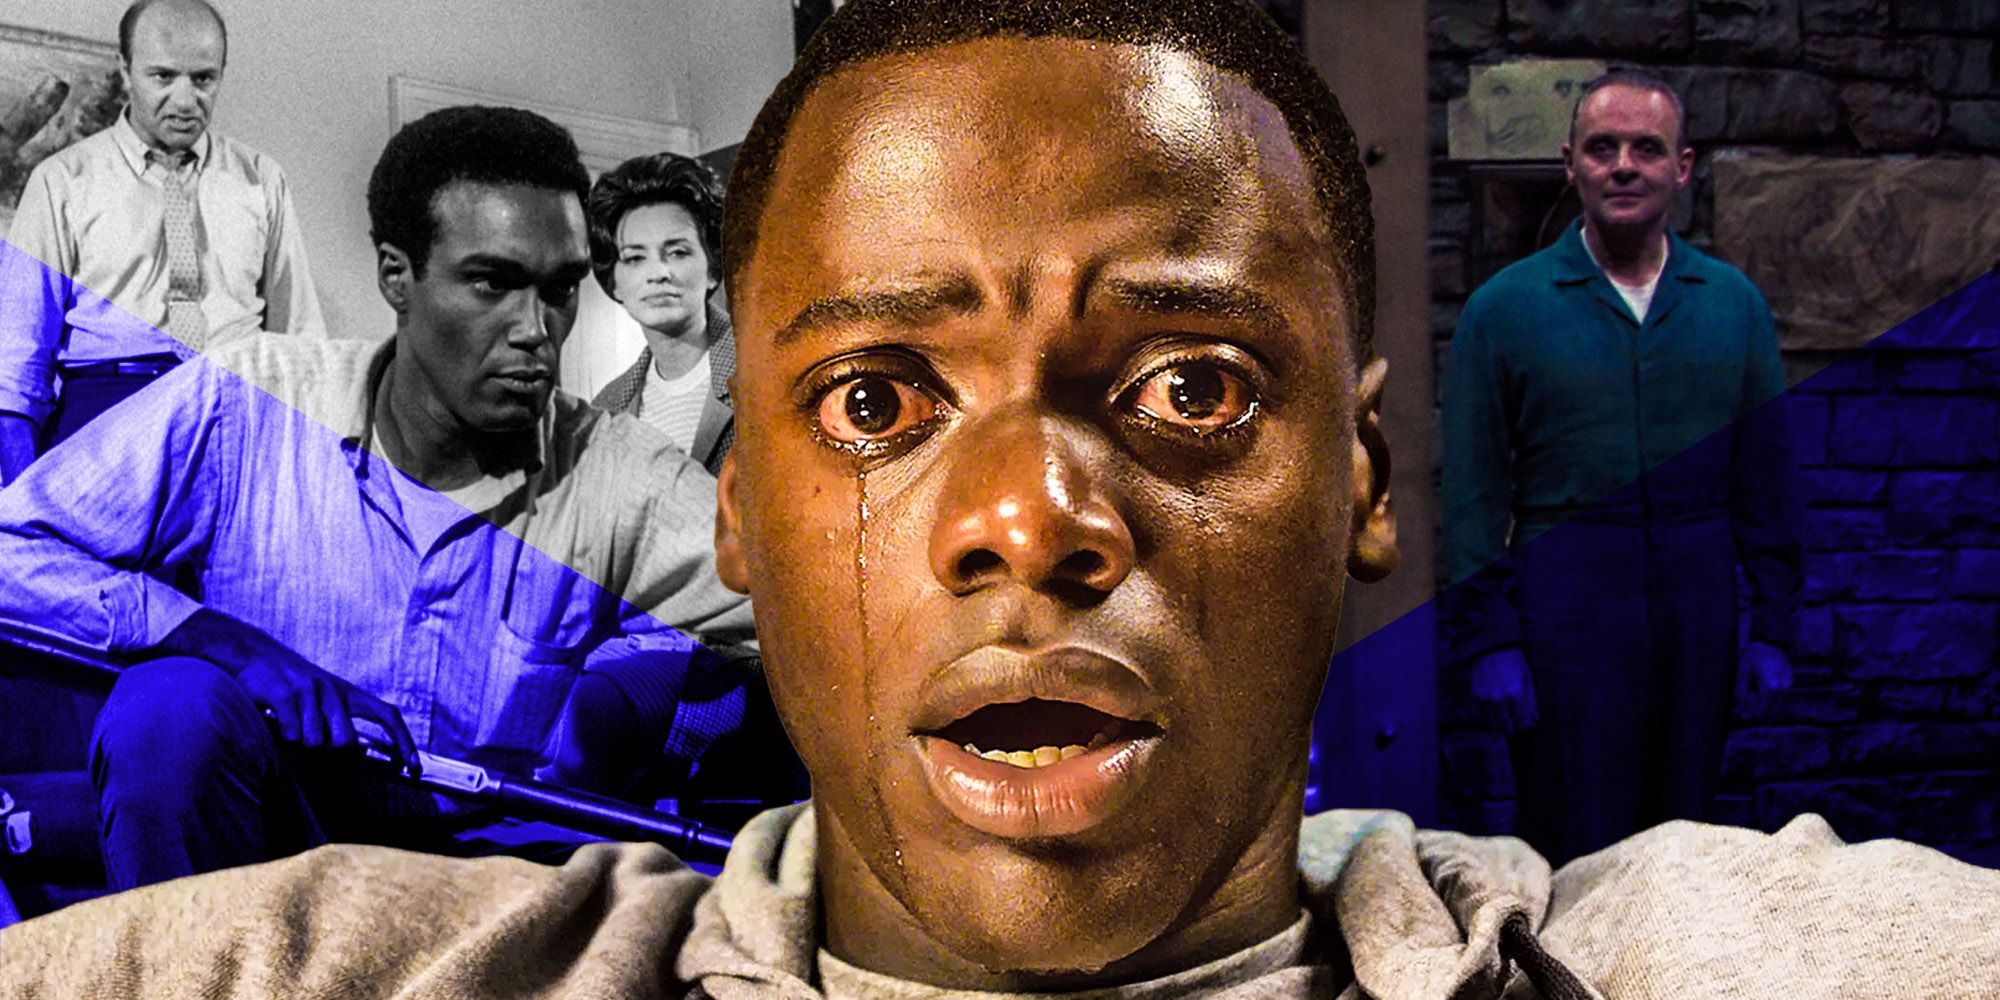 Get Out Horror movie easter eggs Night of the living dead silence of the lambs